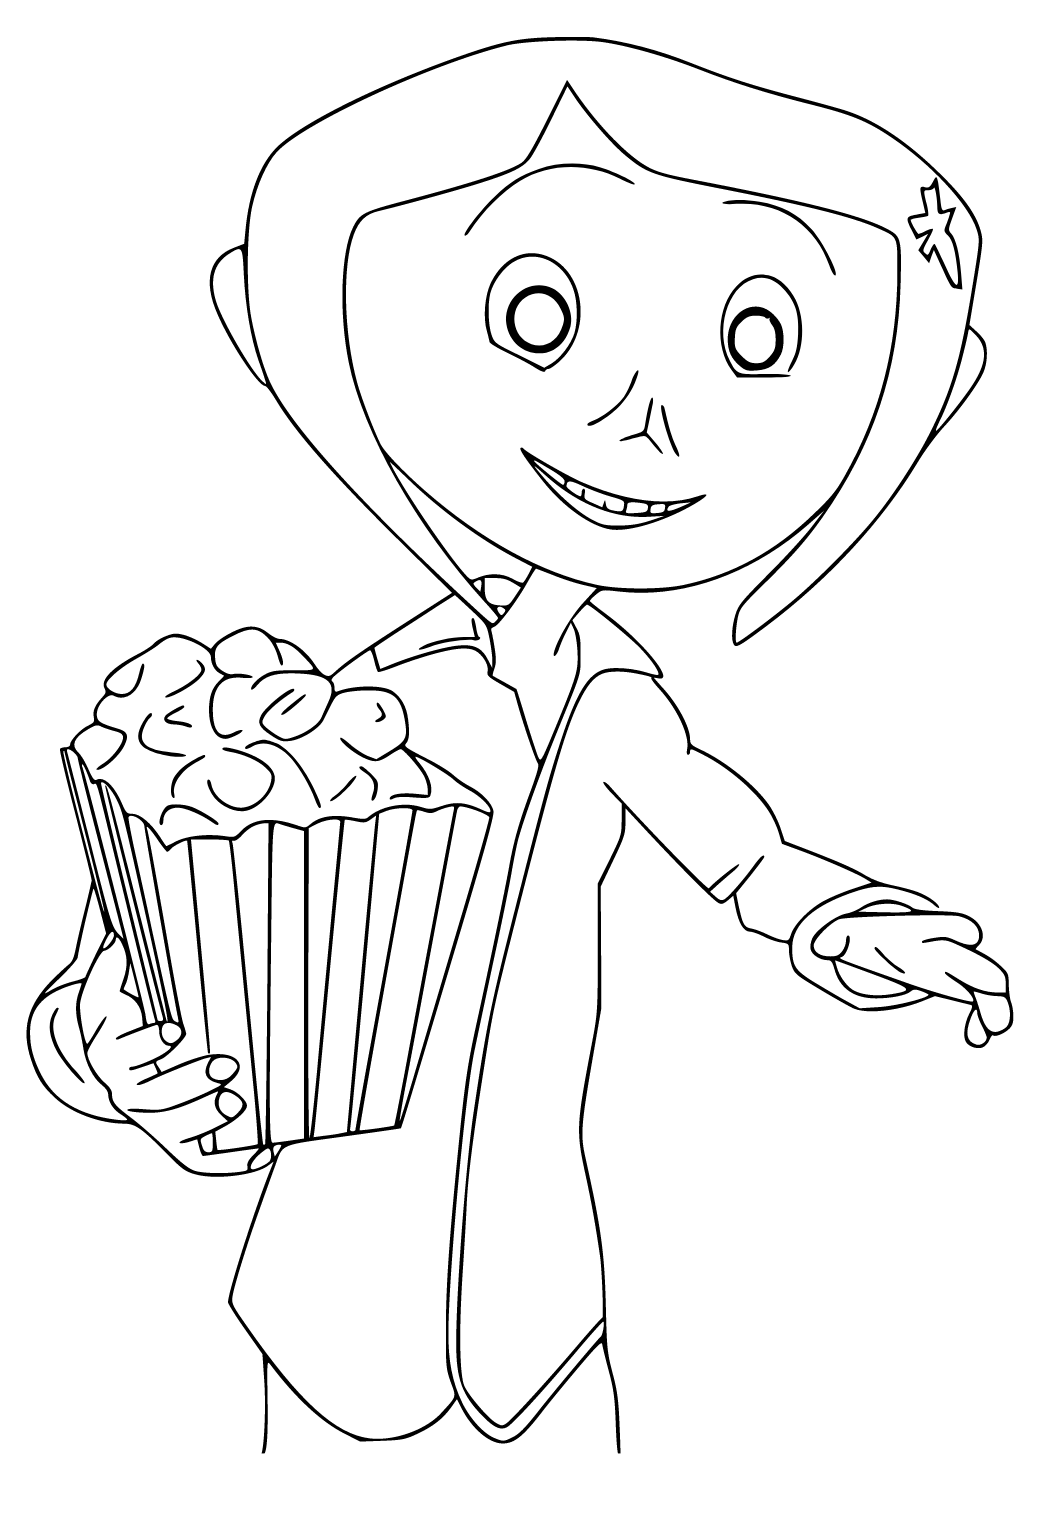 free-printable-coraline-popcorn-coloring-page-for-adults-and-kids